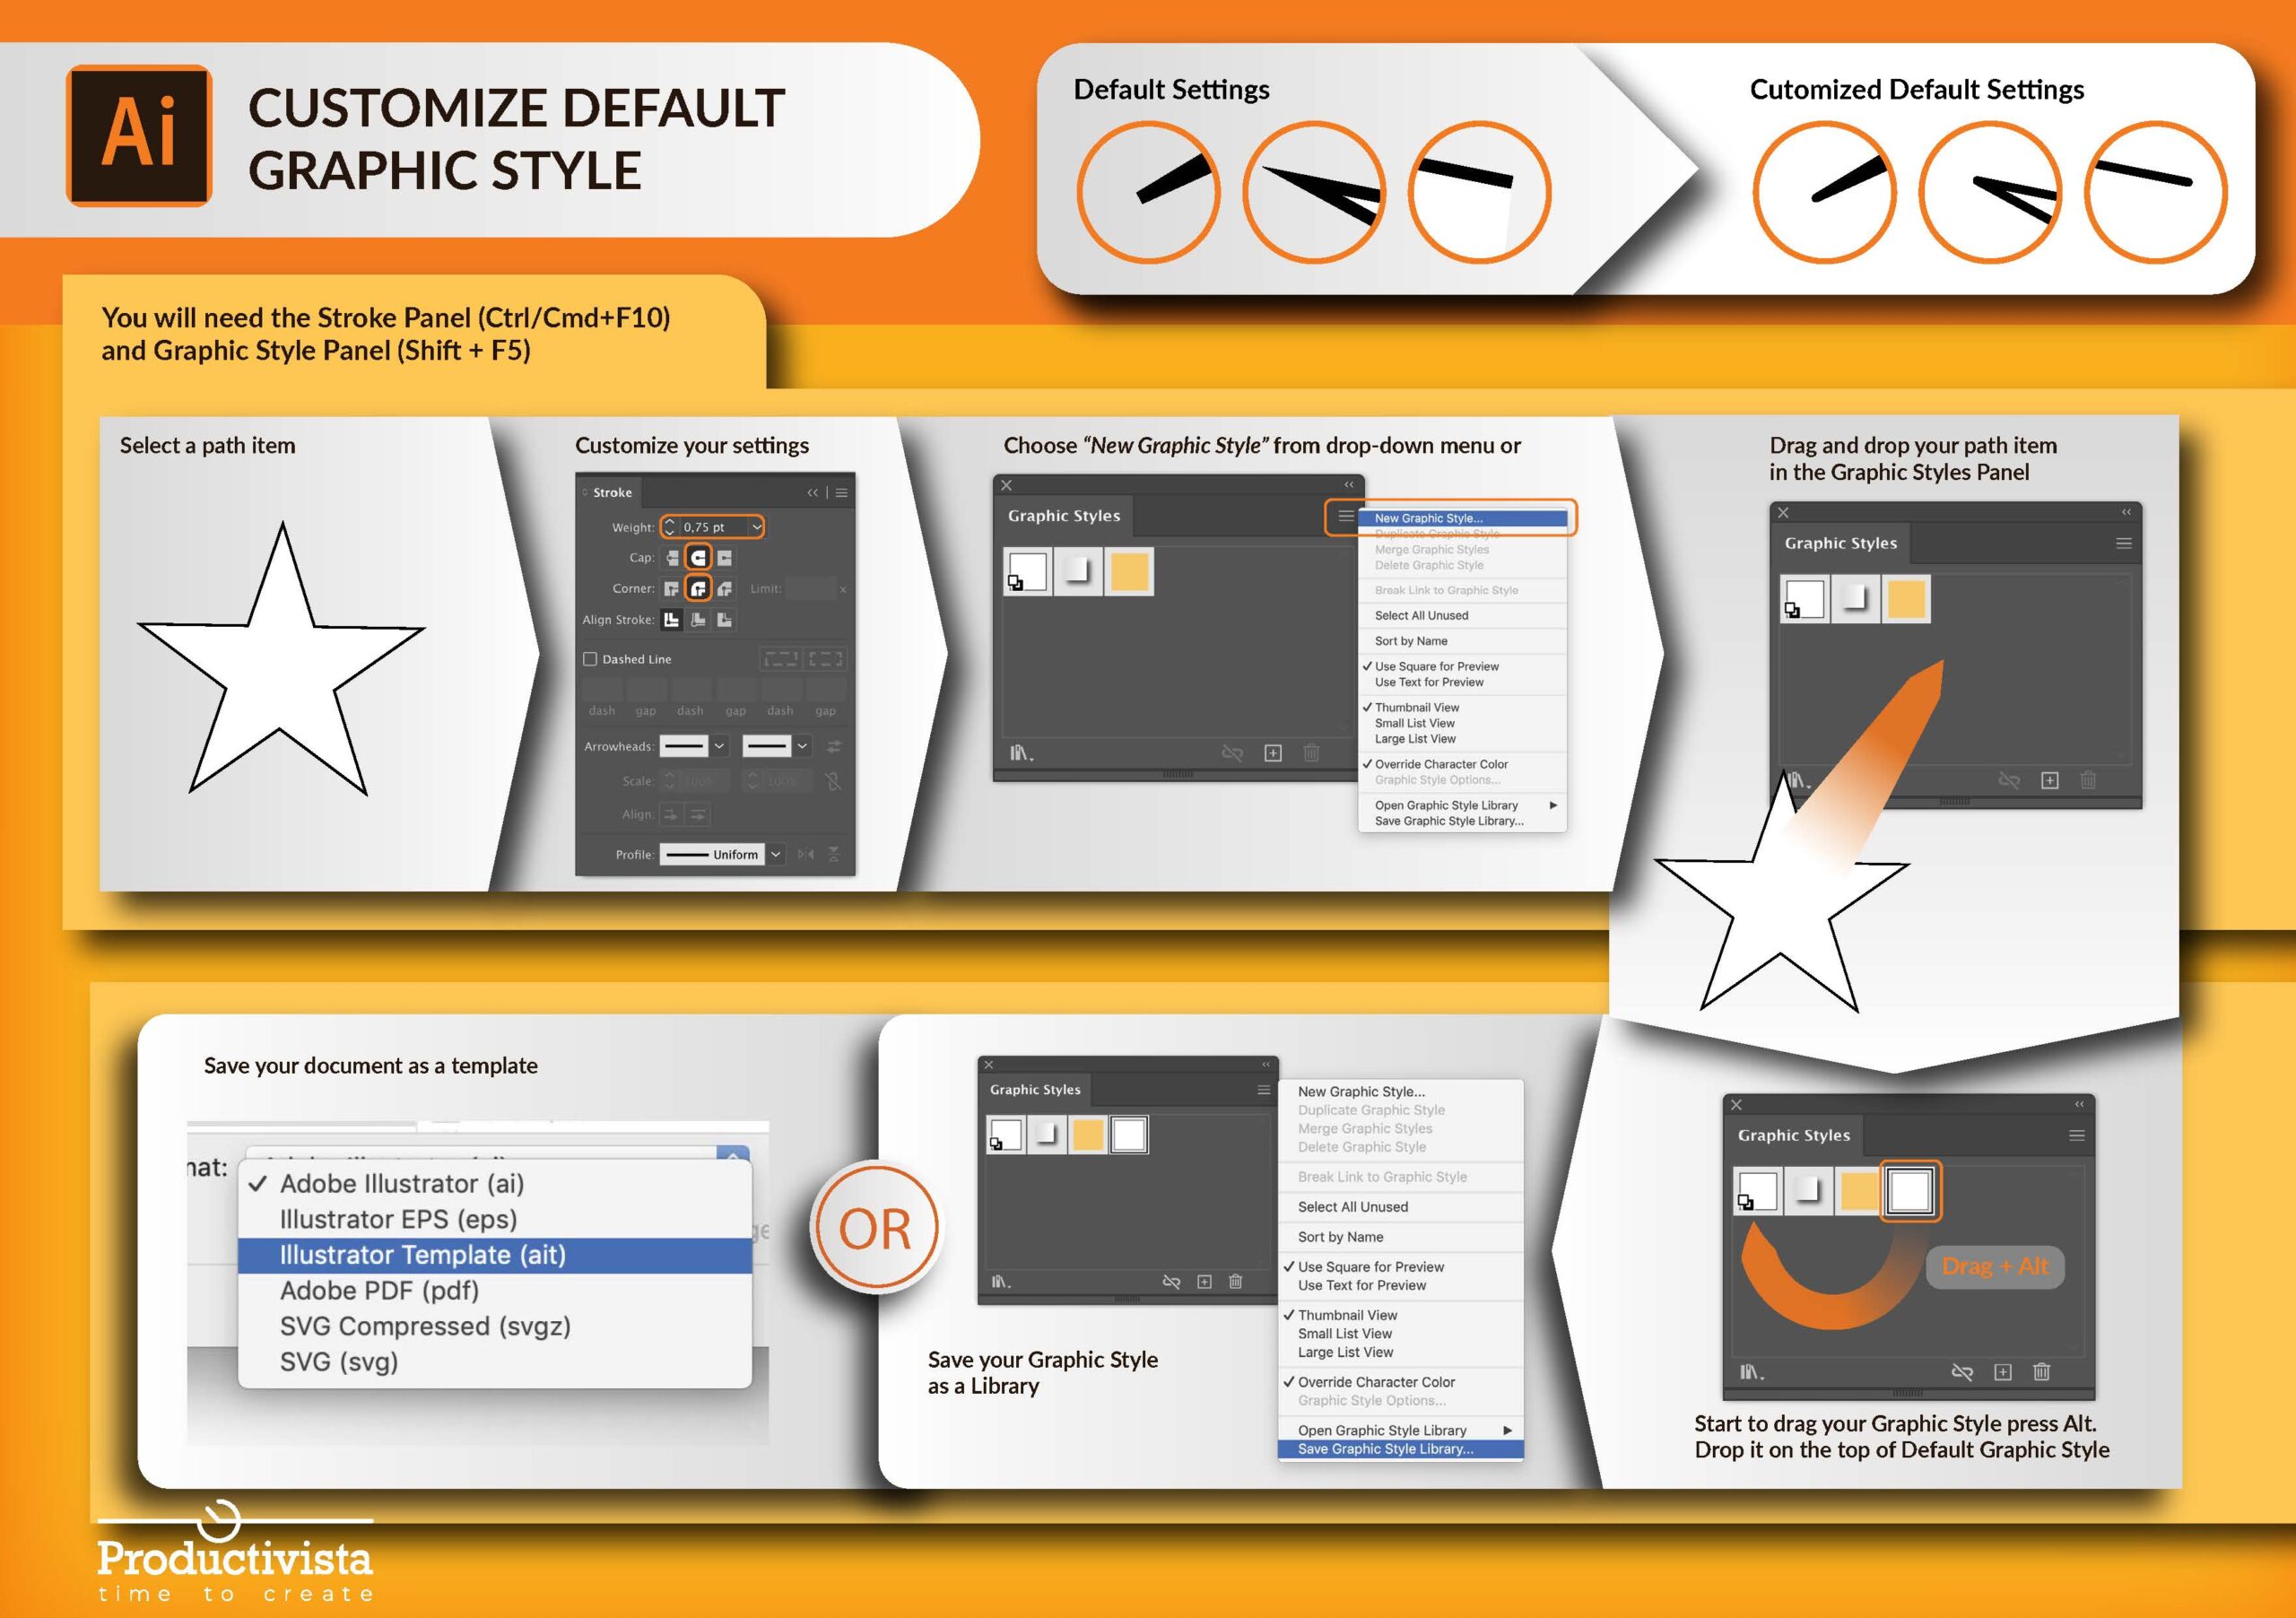 Step by step instructions to own default graphic style